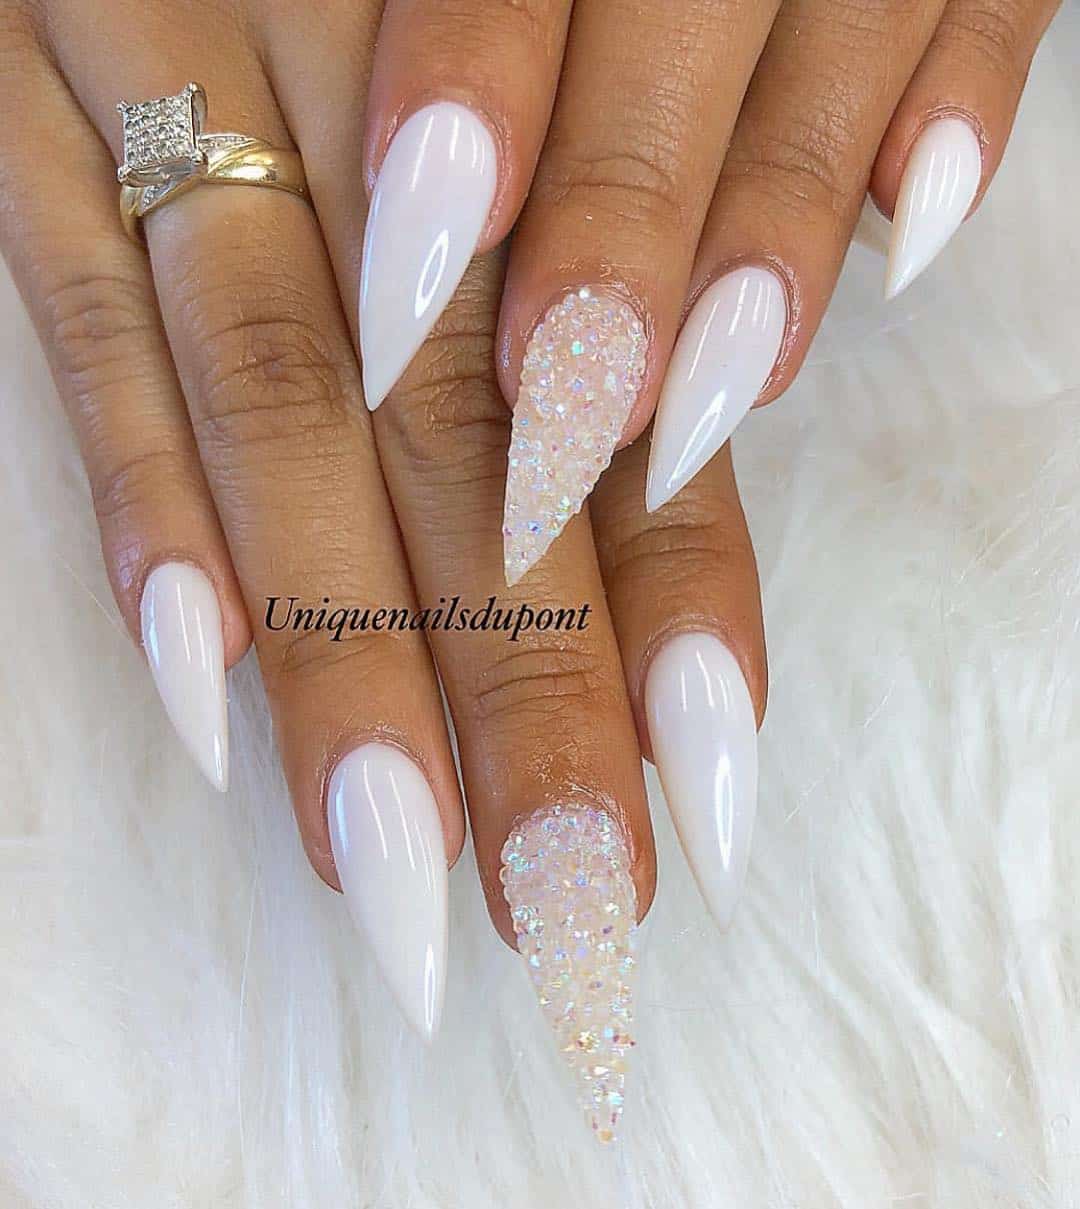 Acrylic Nails with Glitter Accents